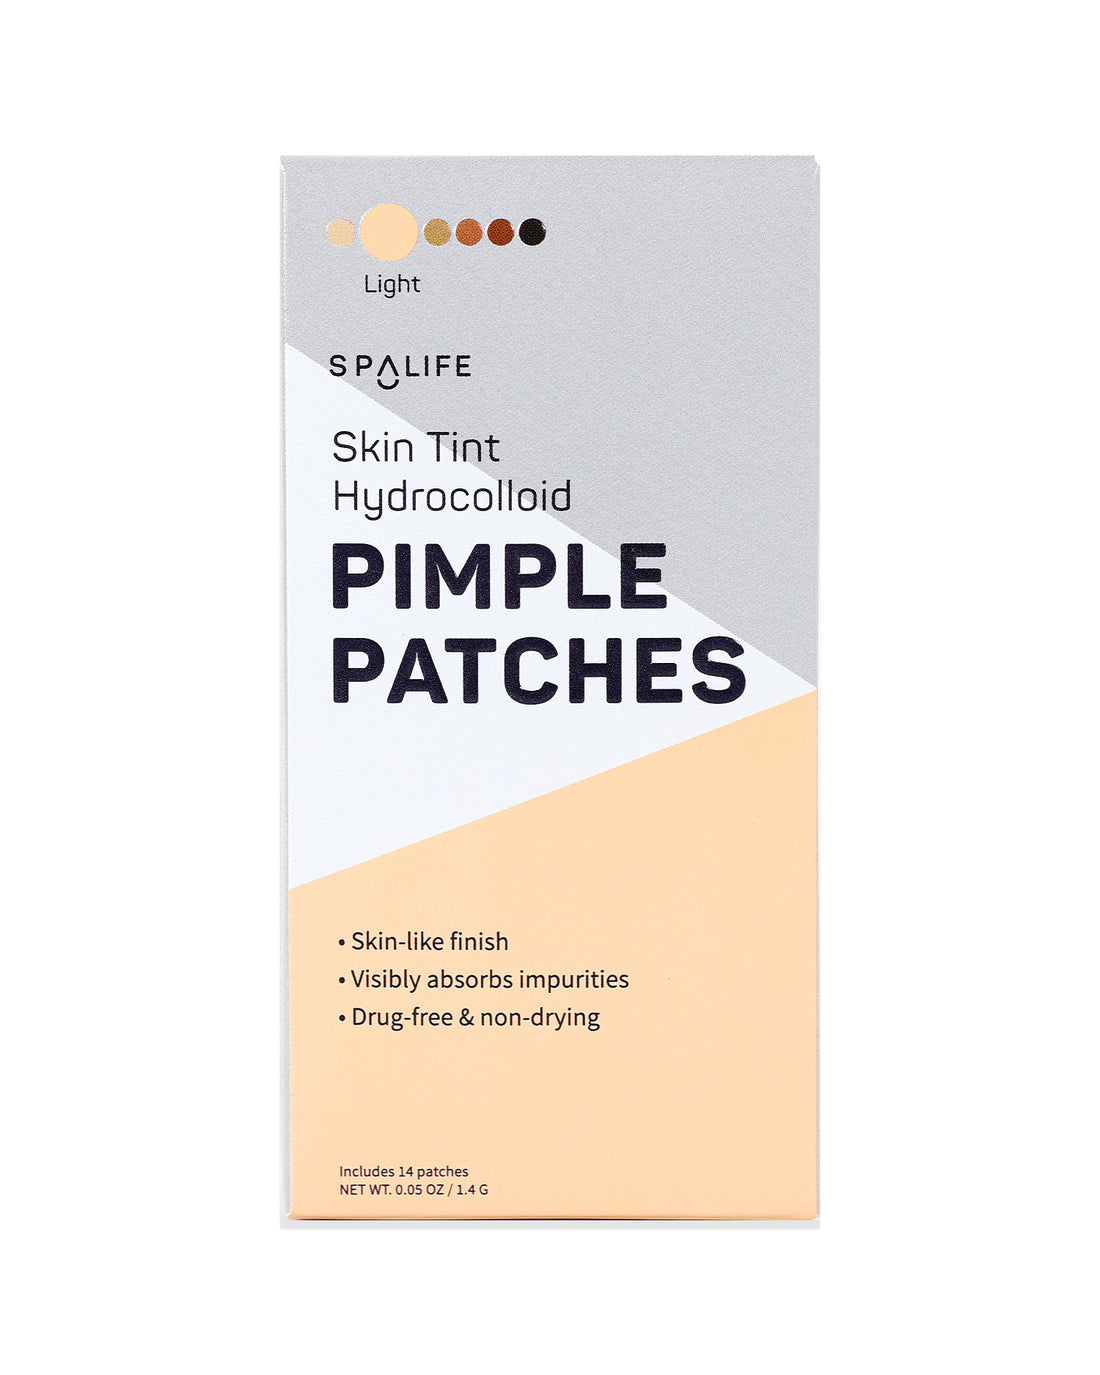 Skin_tint_pimple_patches_packe-166